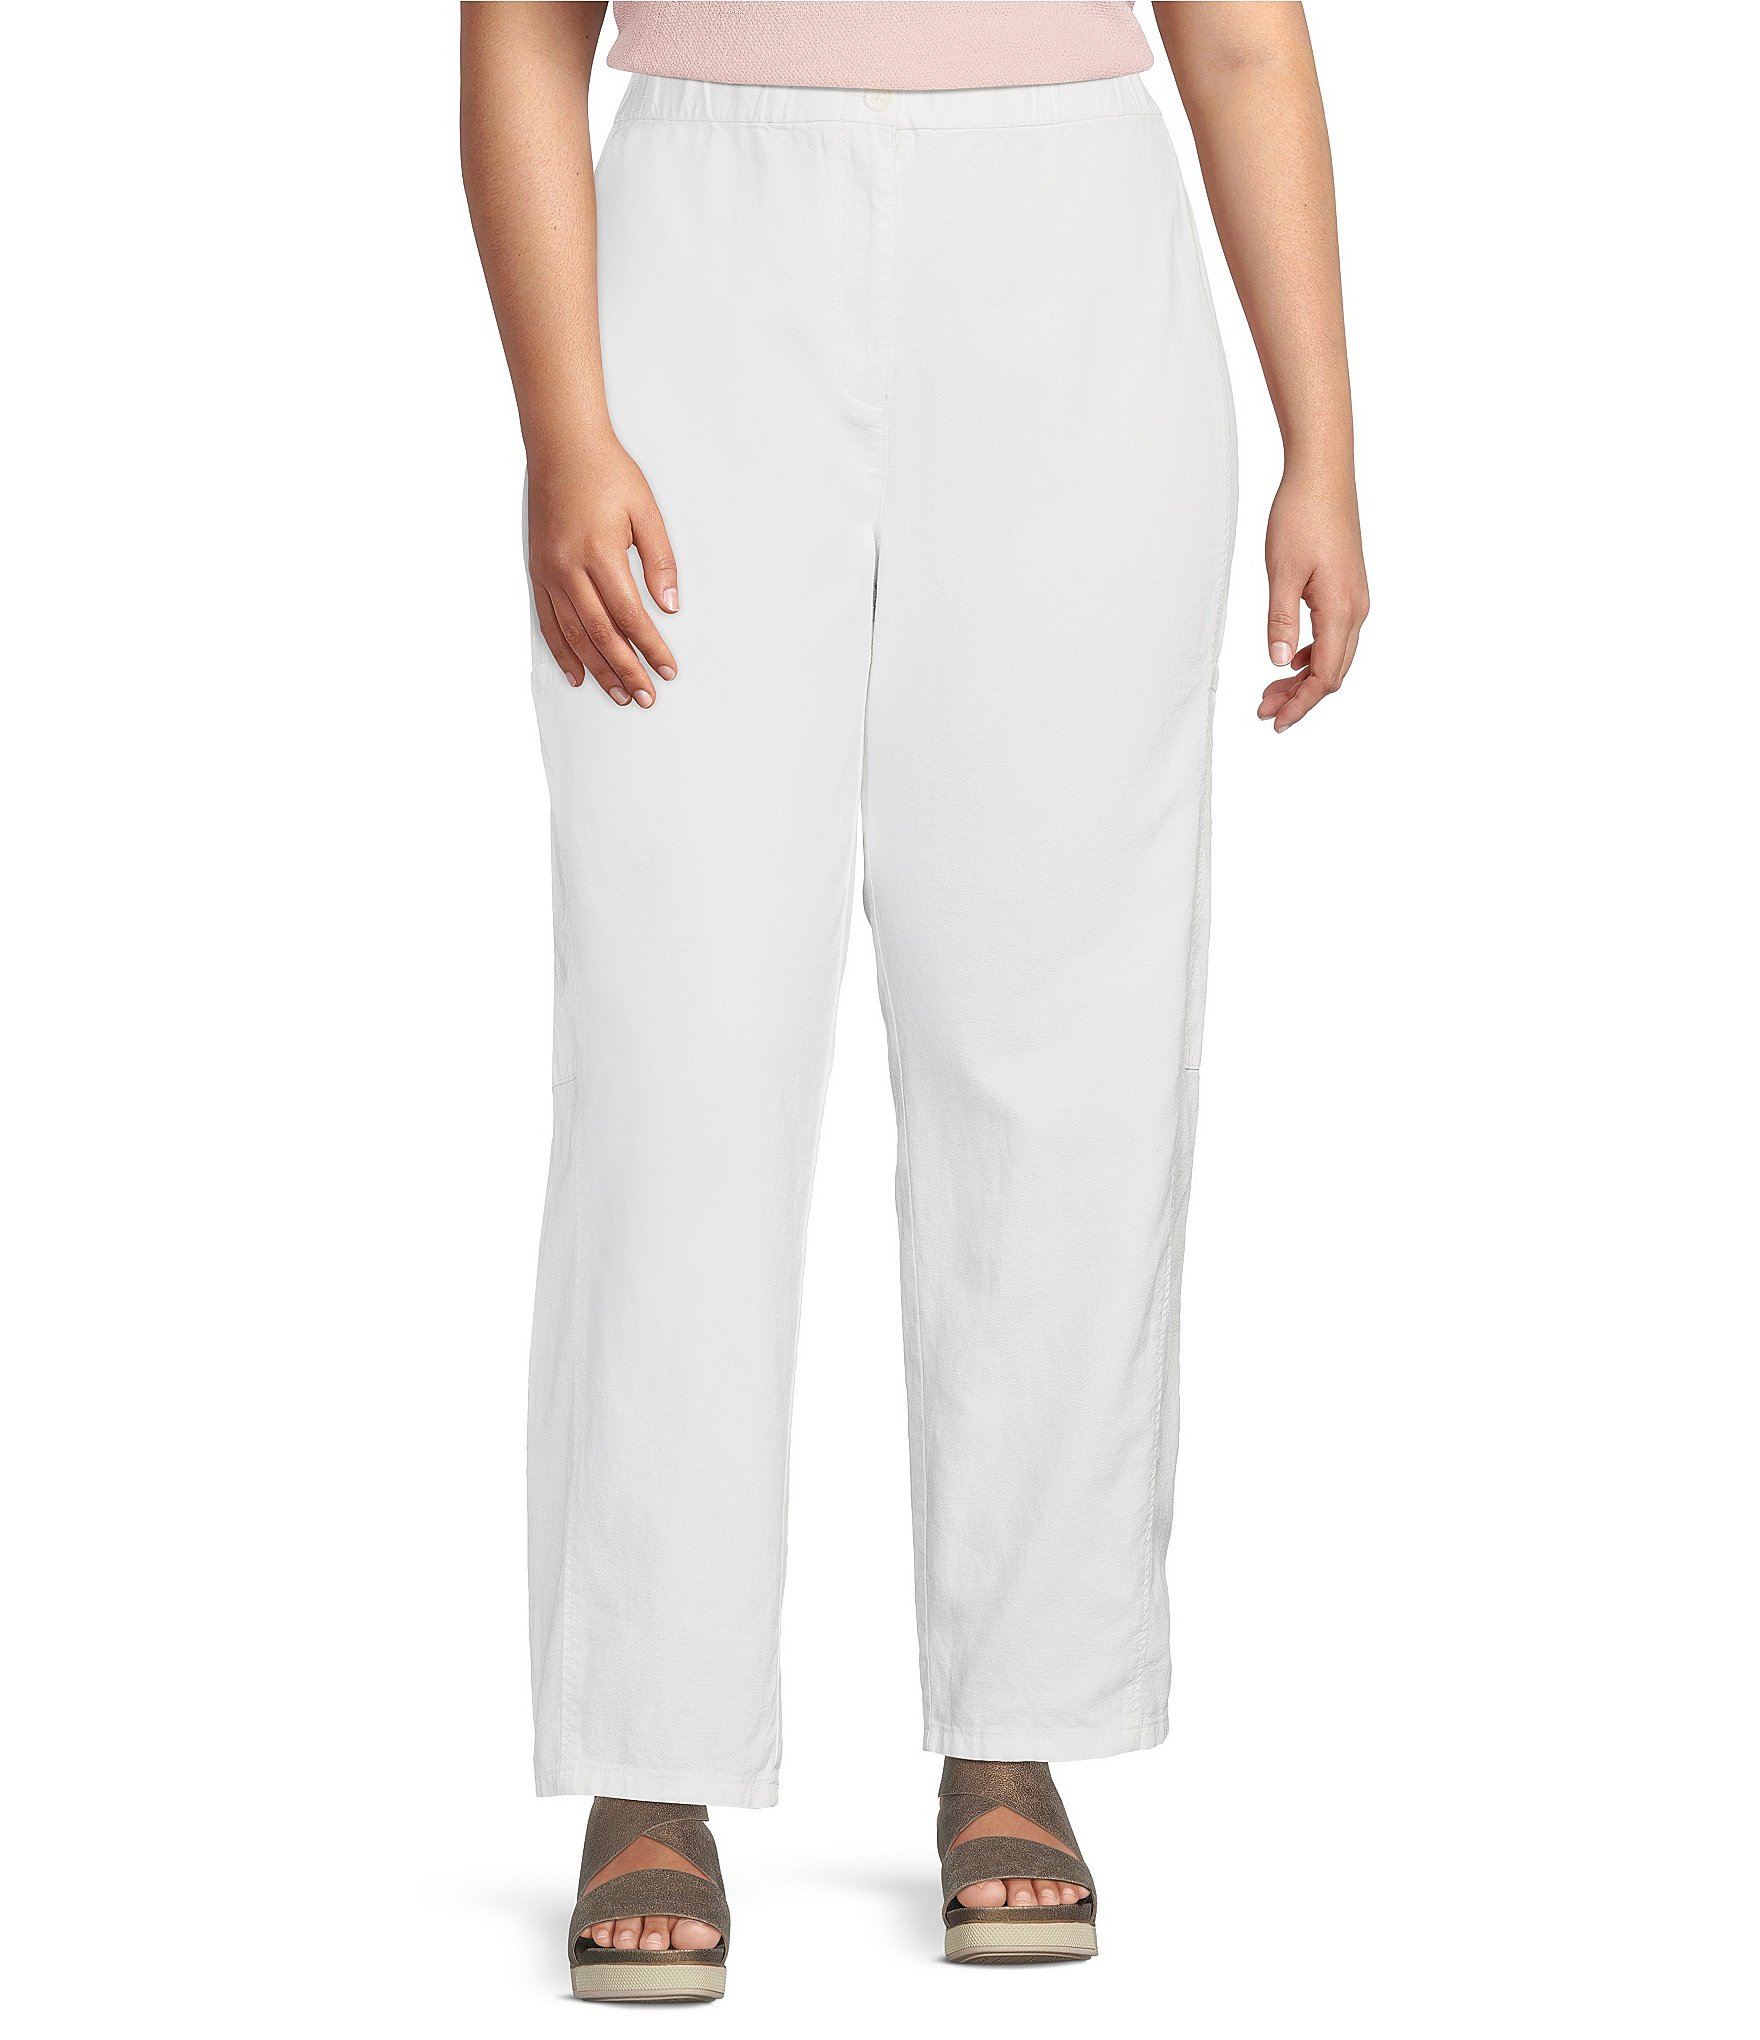 eileen fisher pants: Plus-Size Suits and Workwear Pants